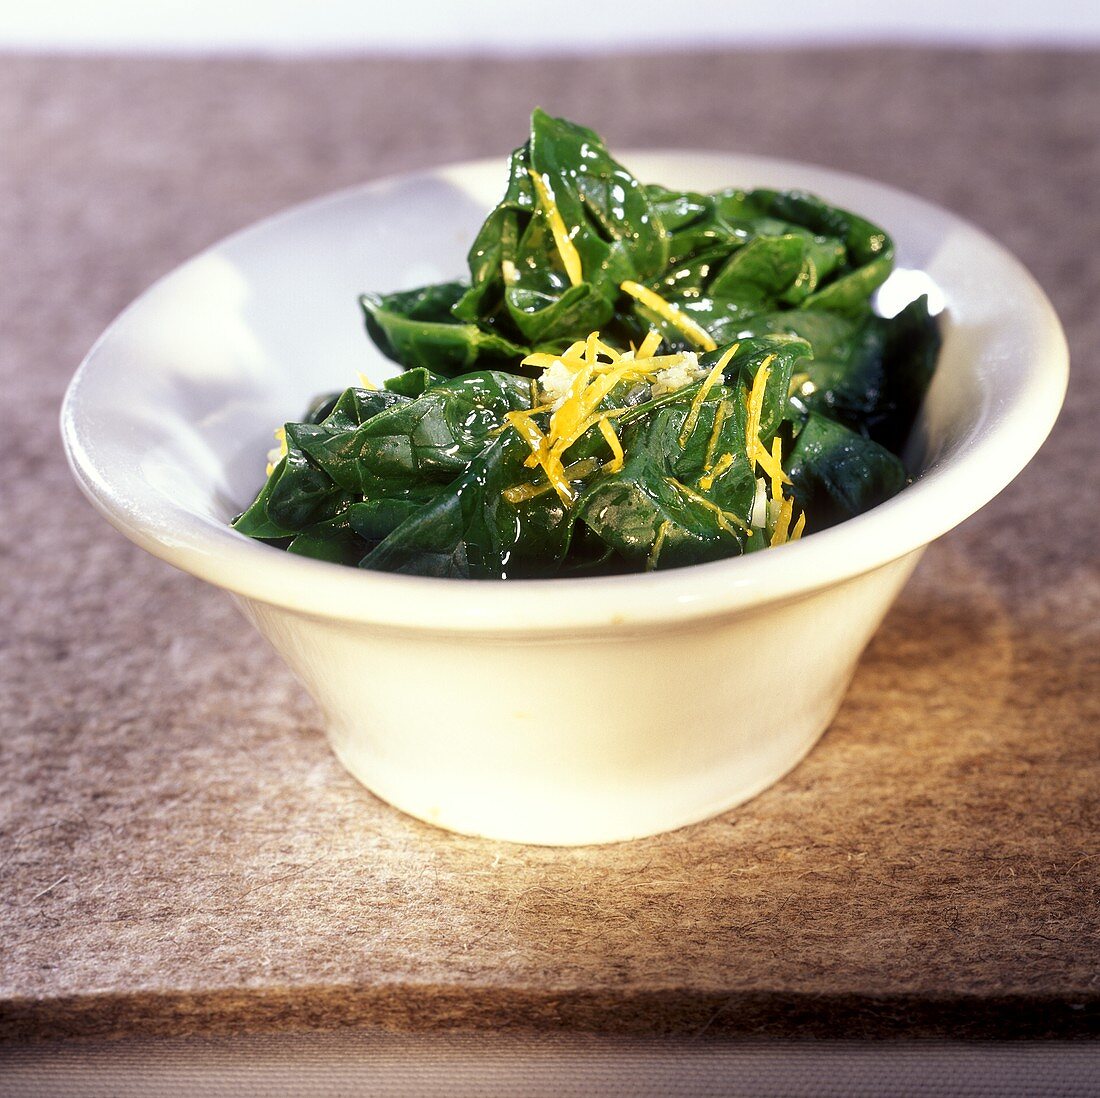 Spinaci al limone (spinach with lemon), Latium, Italy